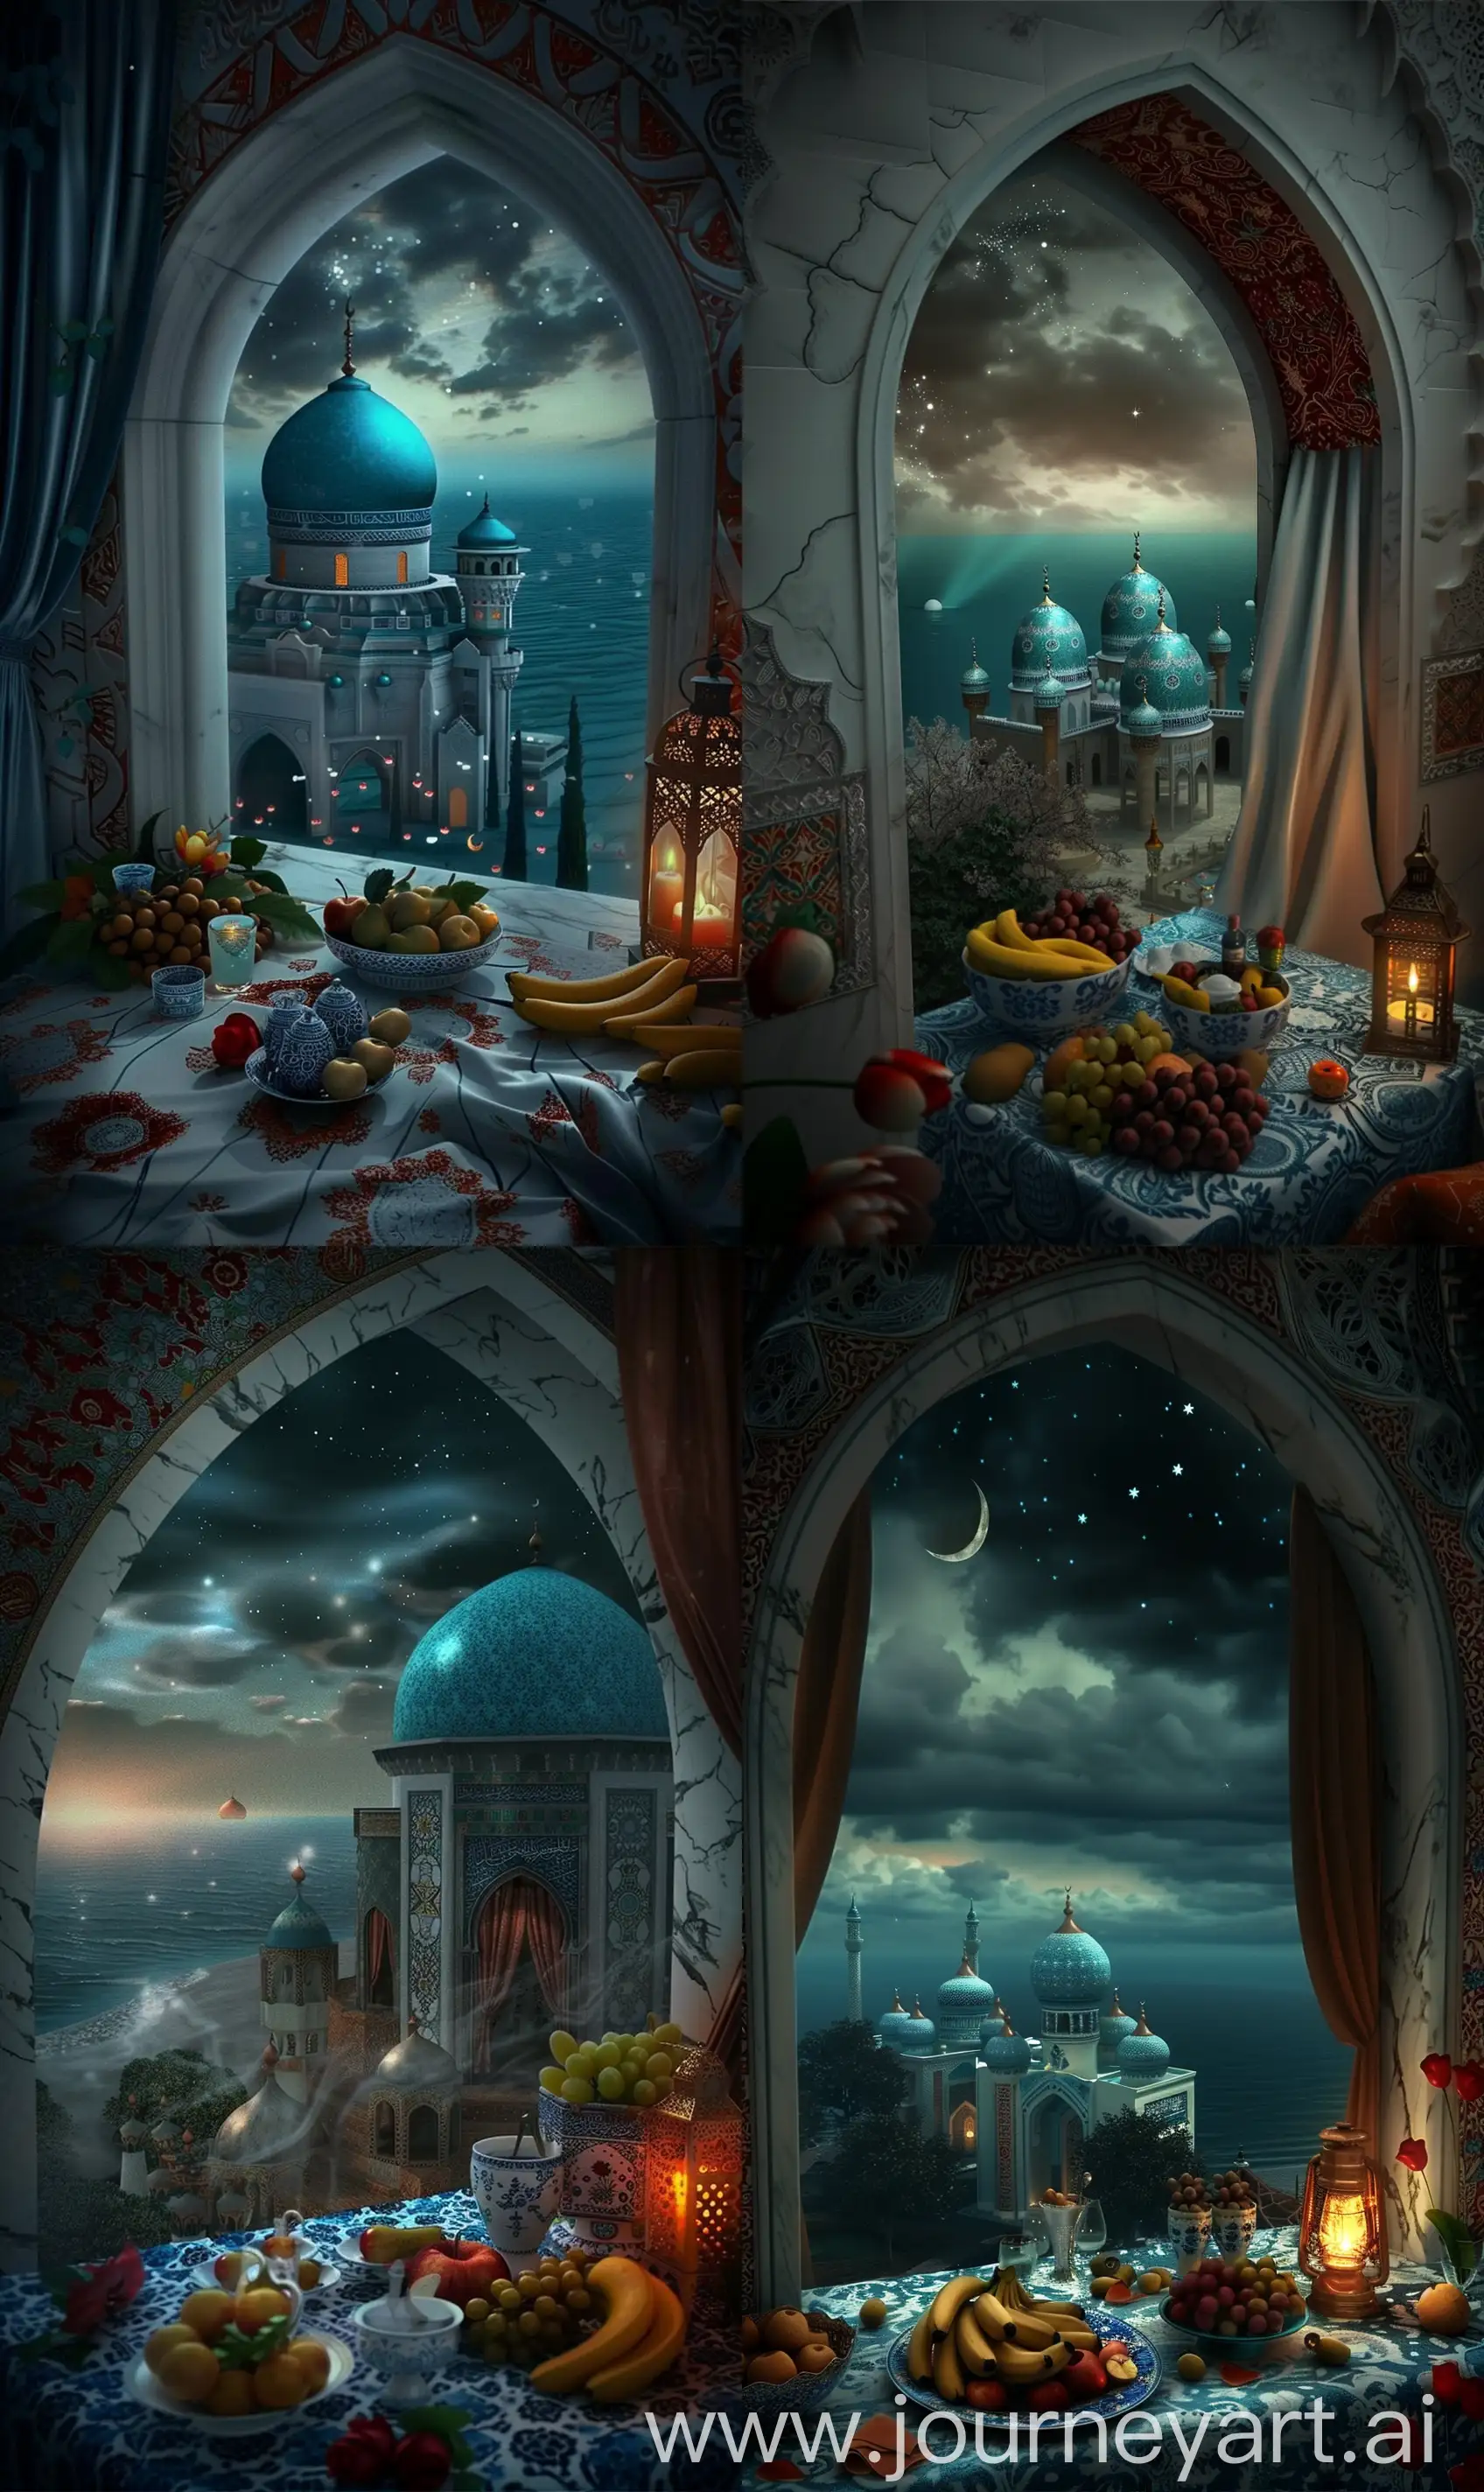 Timurid-Arch-Vista-Persian-Motif-Mosques-and-Arabian-Feast-with-Starry-Sky